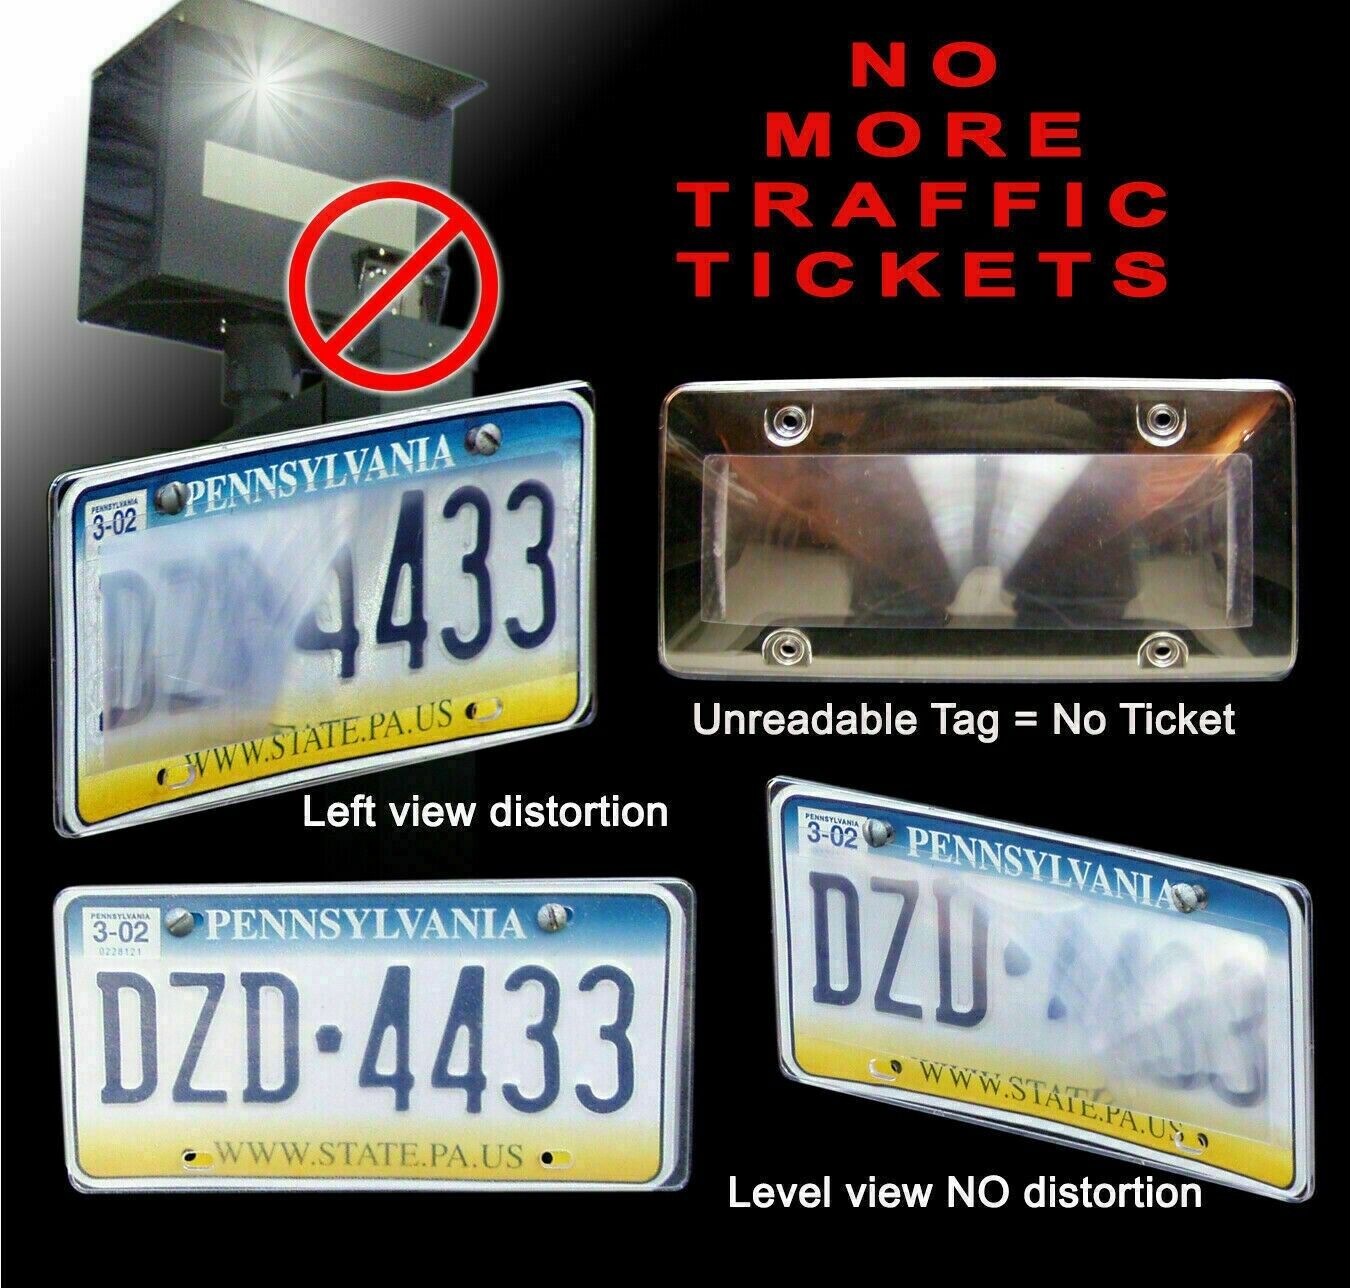 1 Anti speed RedLight Toll camera stopper license plate cover that block picture